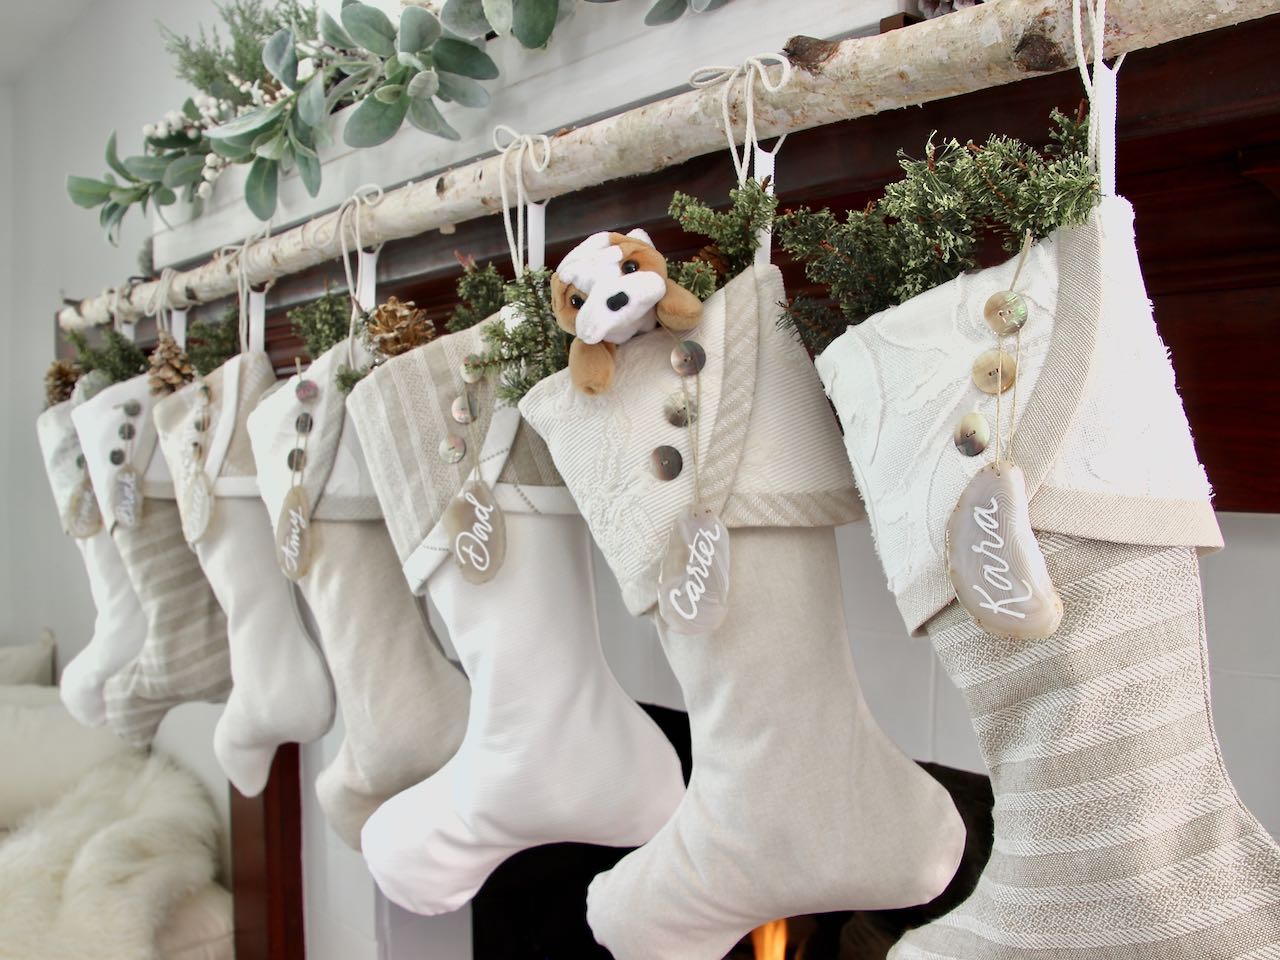 7 coordinating yet unique Christmas stockings are hanging from a mantel above a fire. Agate slice name tags hang from the top of three buttons on each cuff